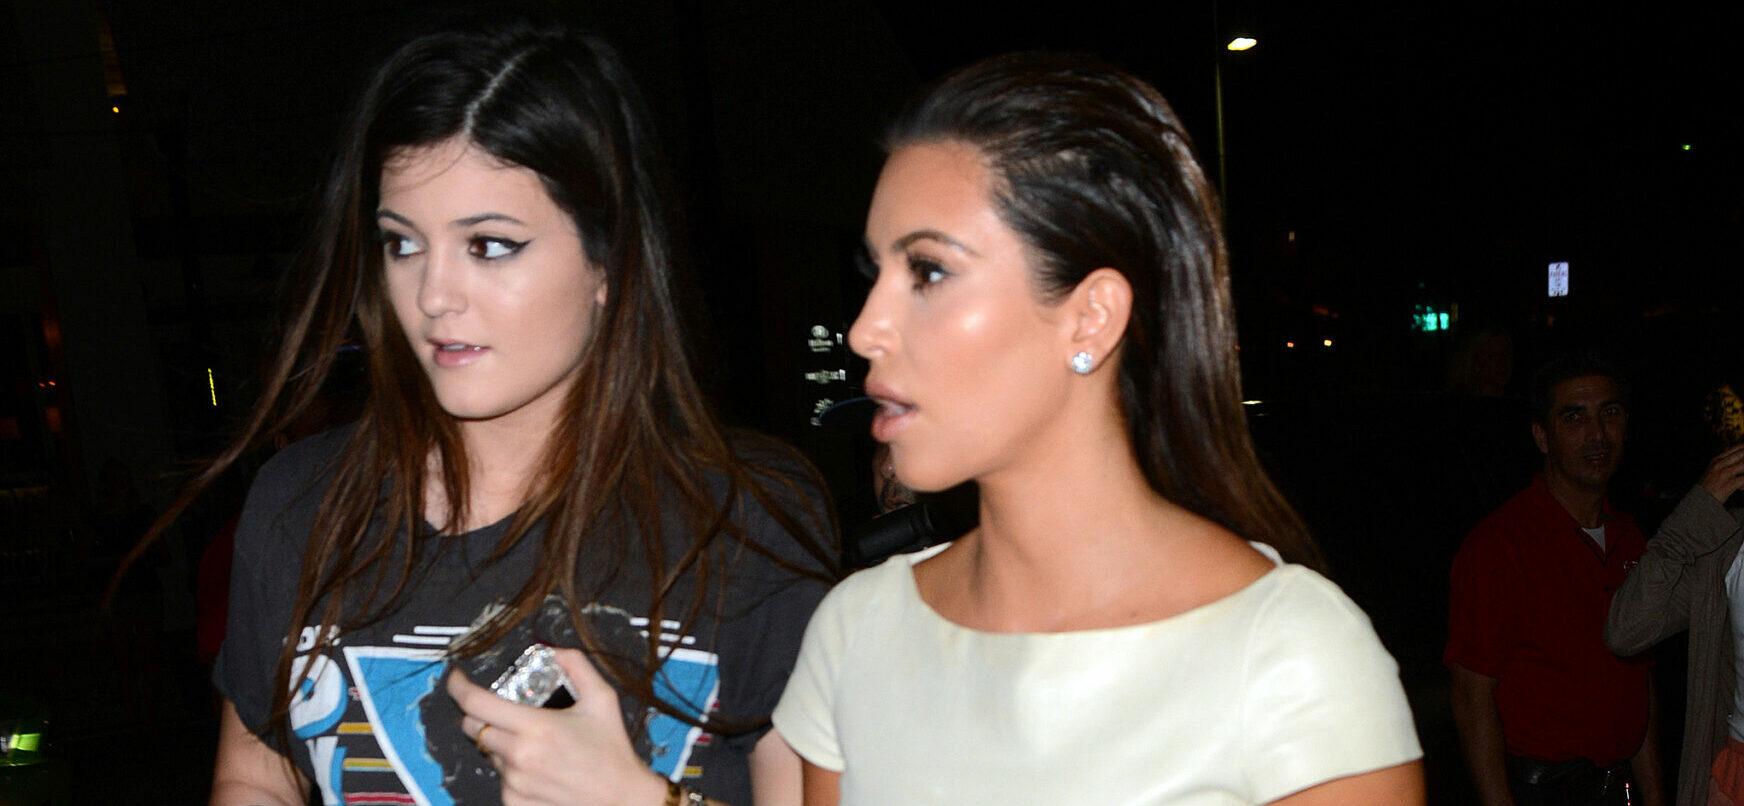 Kim Kardashian arrives with sisters Kylie Jenner and Kourtney Kardashian to have dinner at Prime 112 in Miami Beach